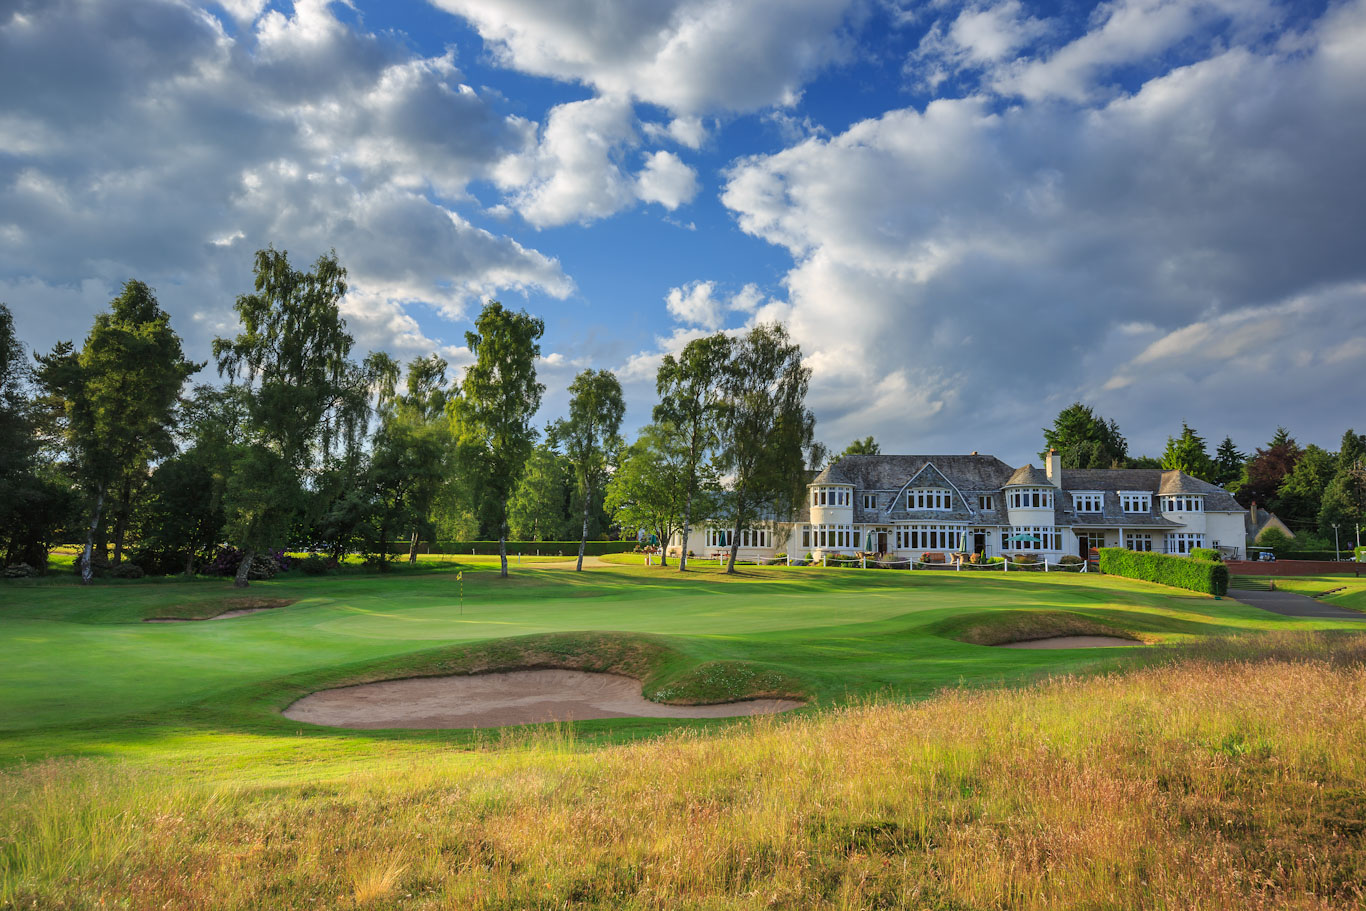 The beautiful surroundings at Blairgowrie Golf Club, Perthshire, Scotland